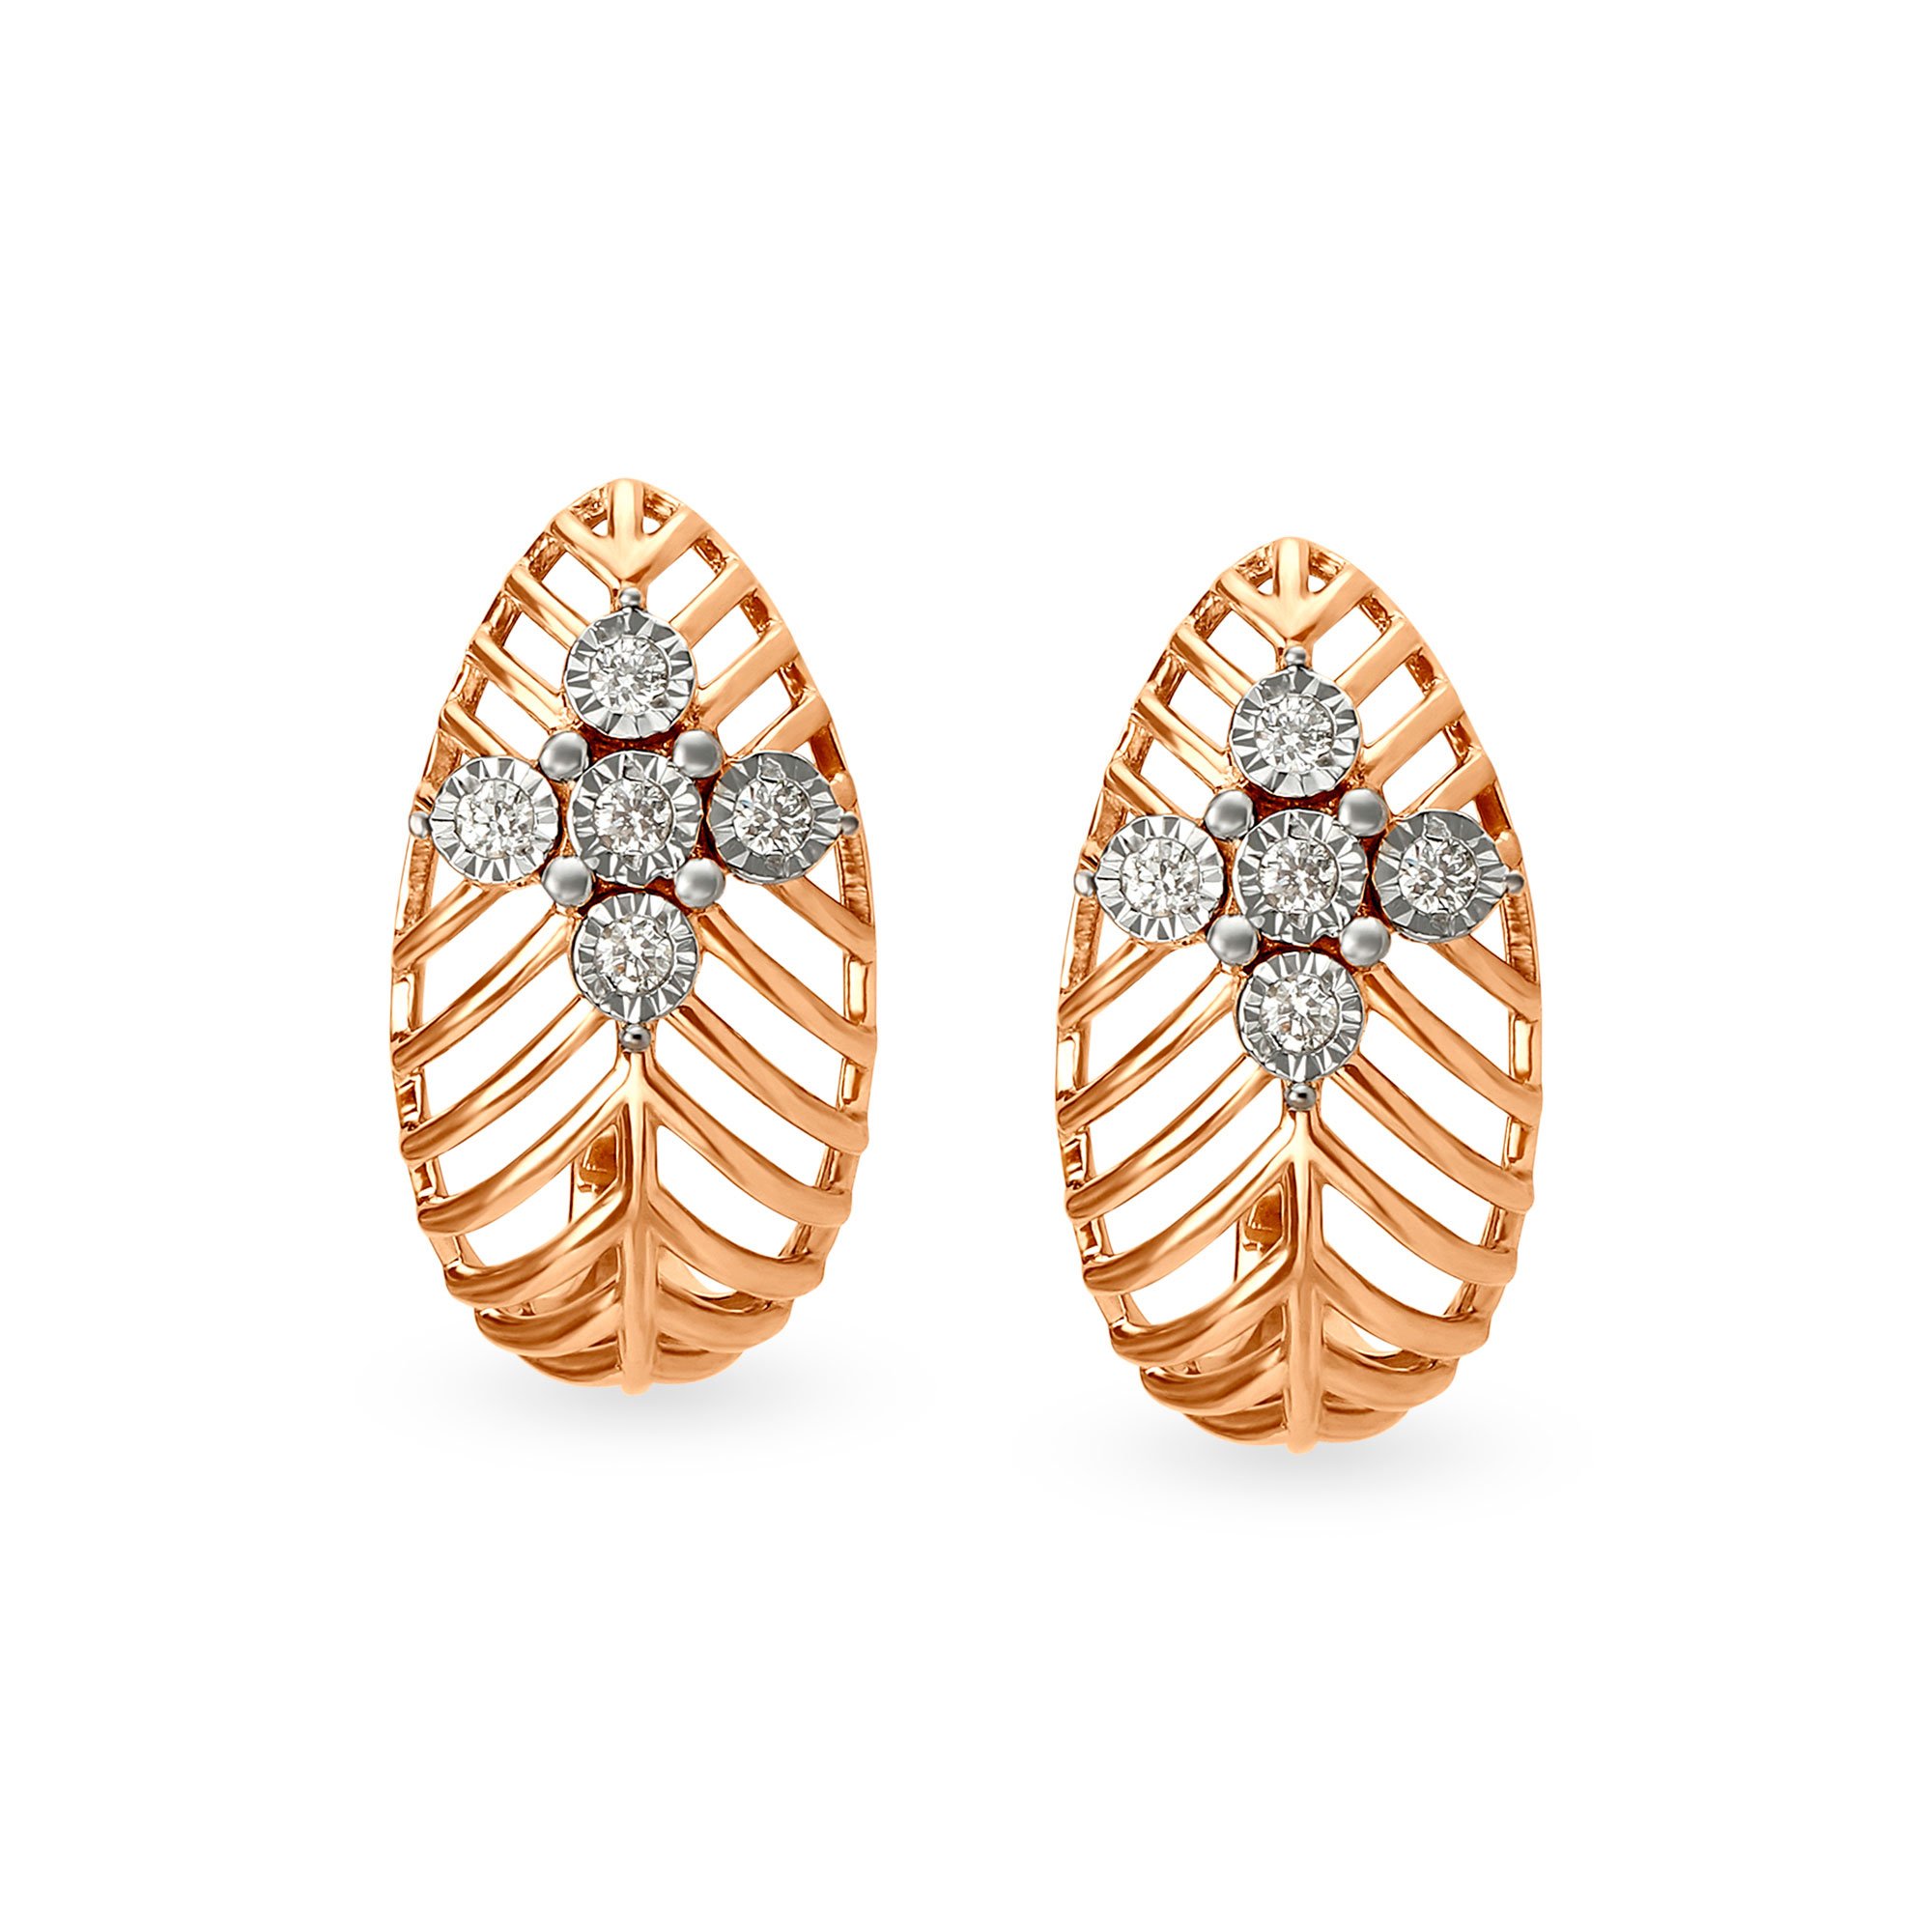 Chic White and Rose Gold Diamond Hoop Earrings